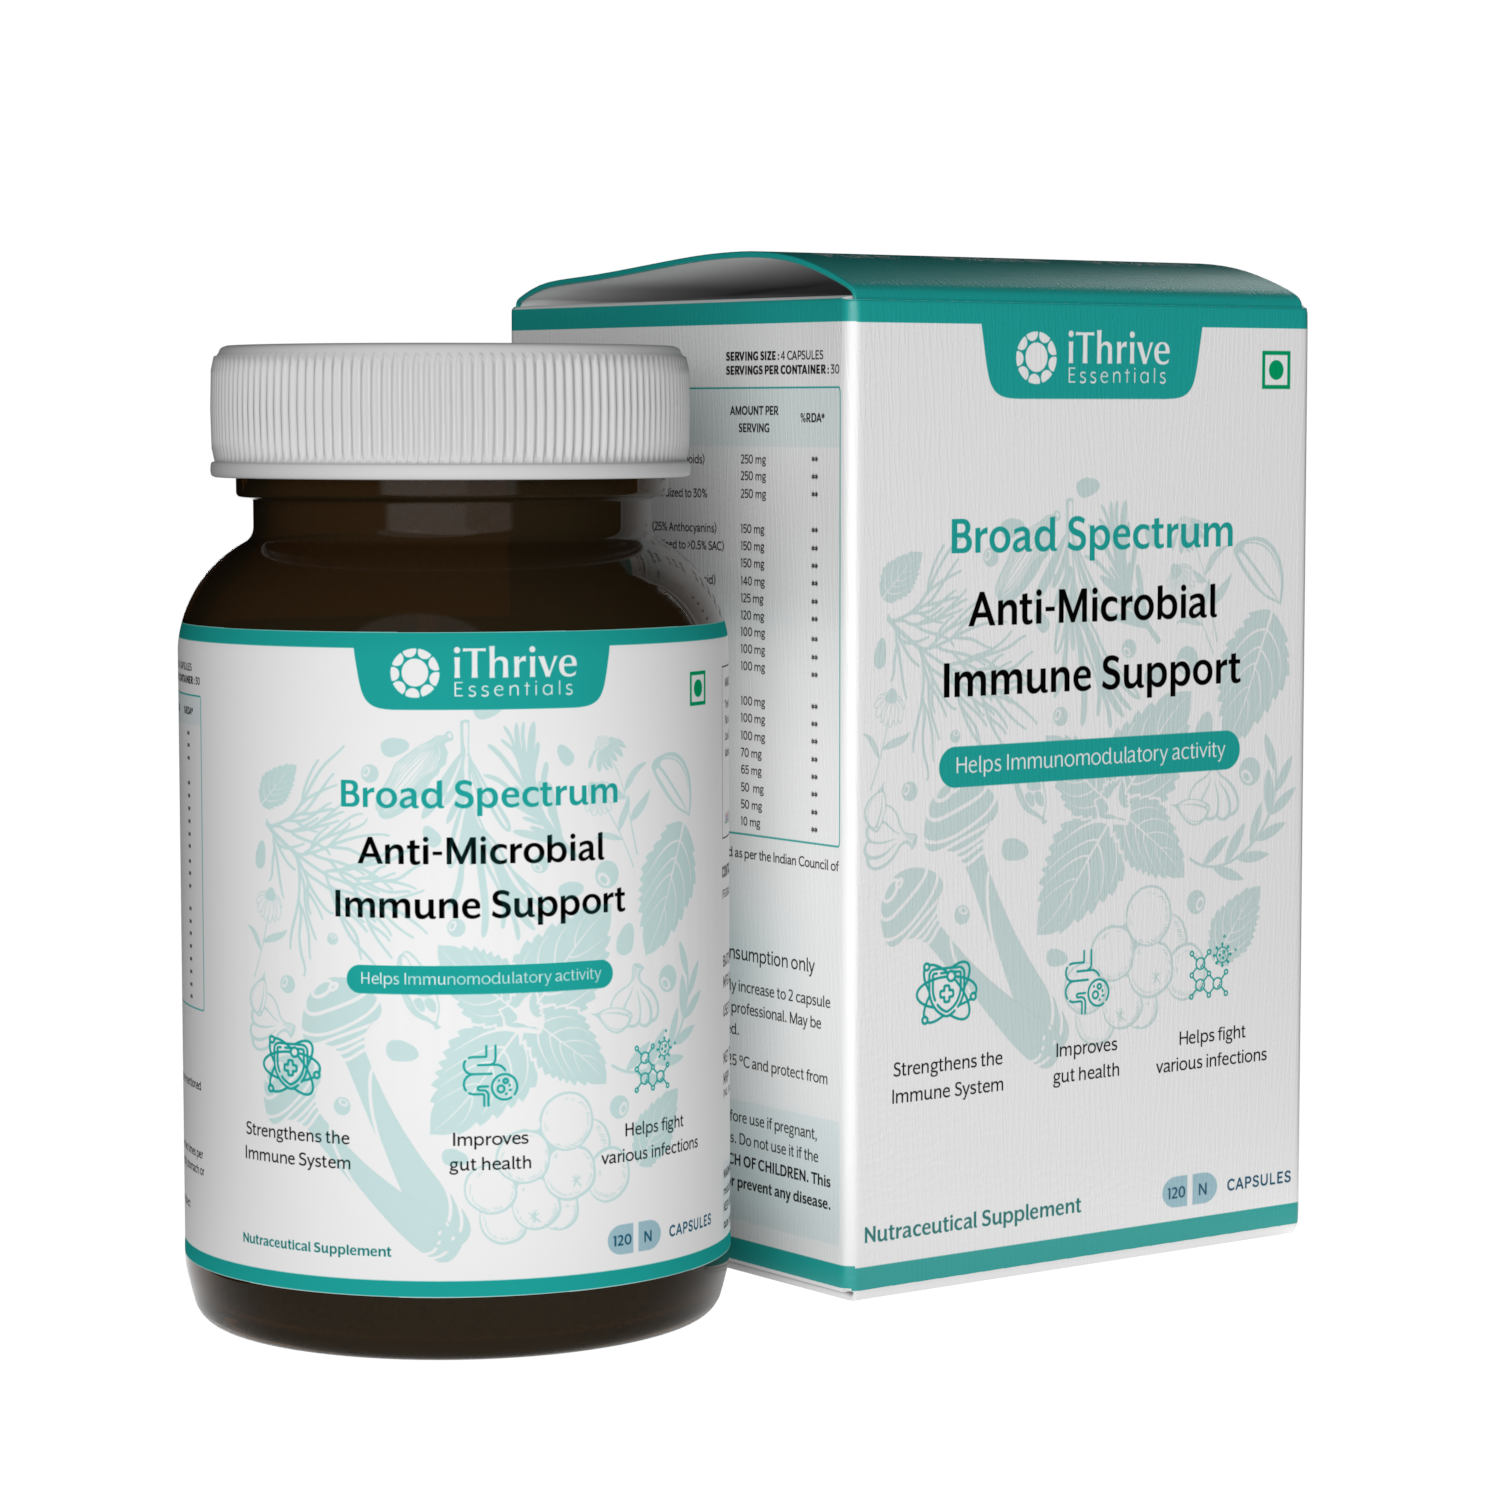 mono carton with glass bottle of immune support supplement 